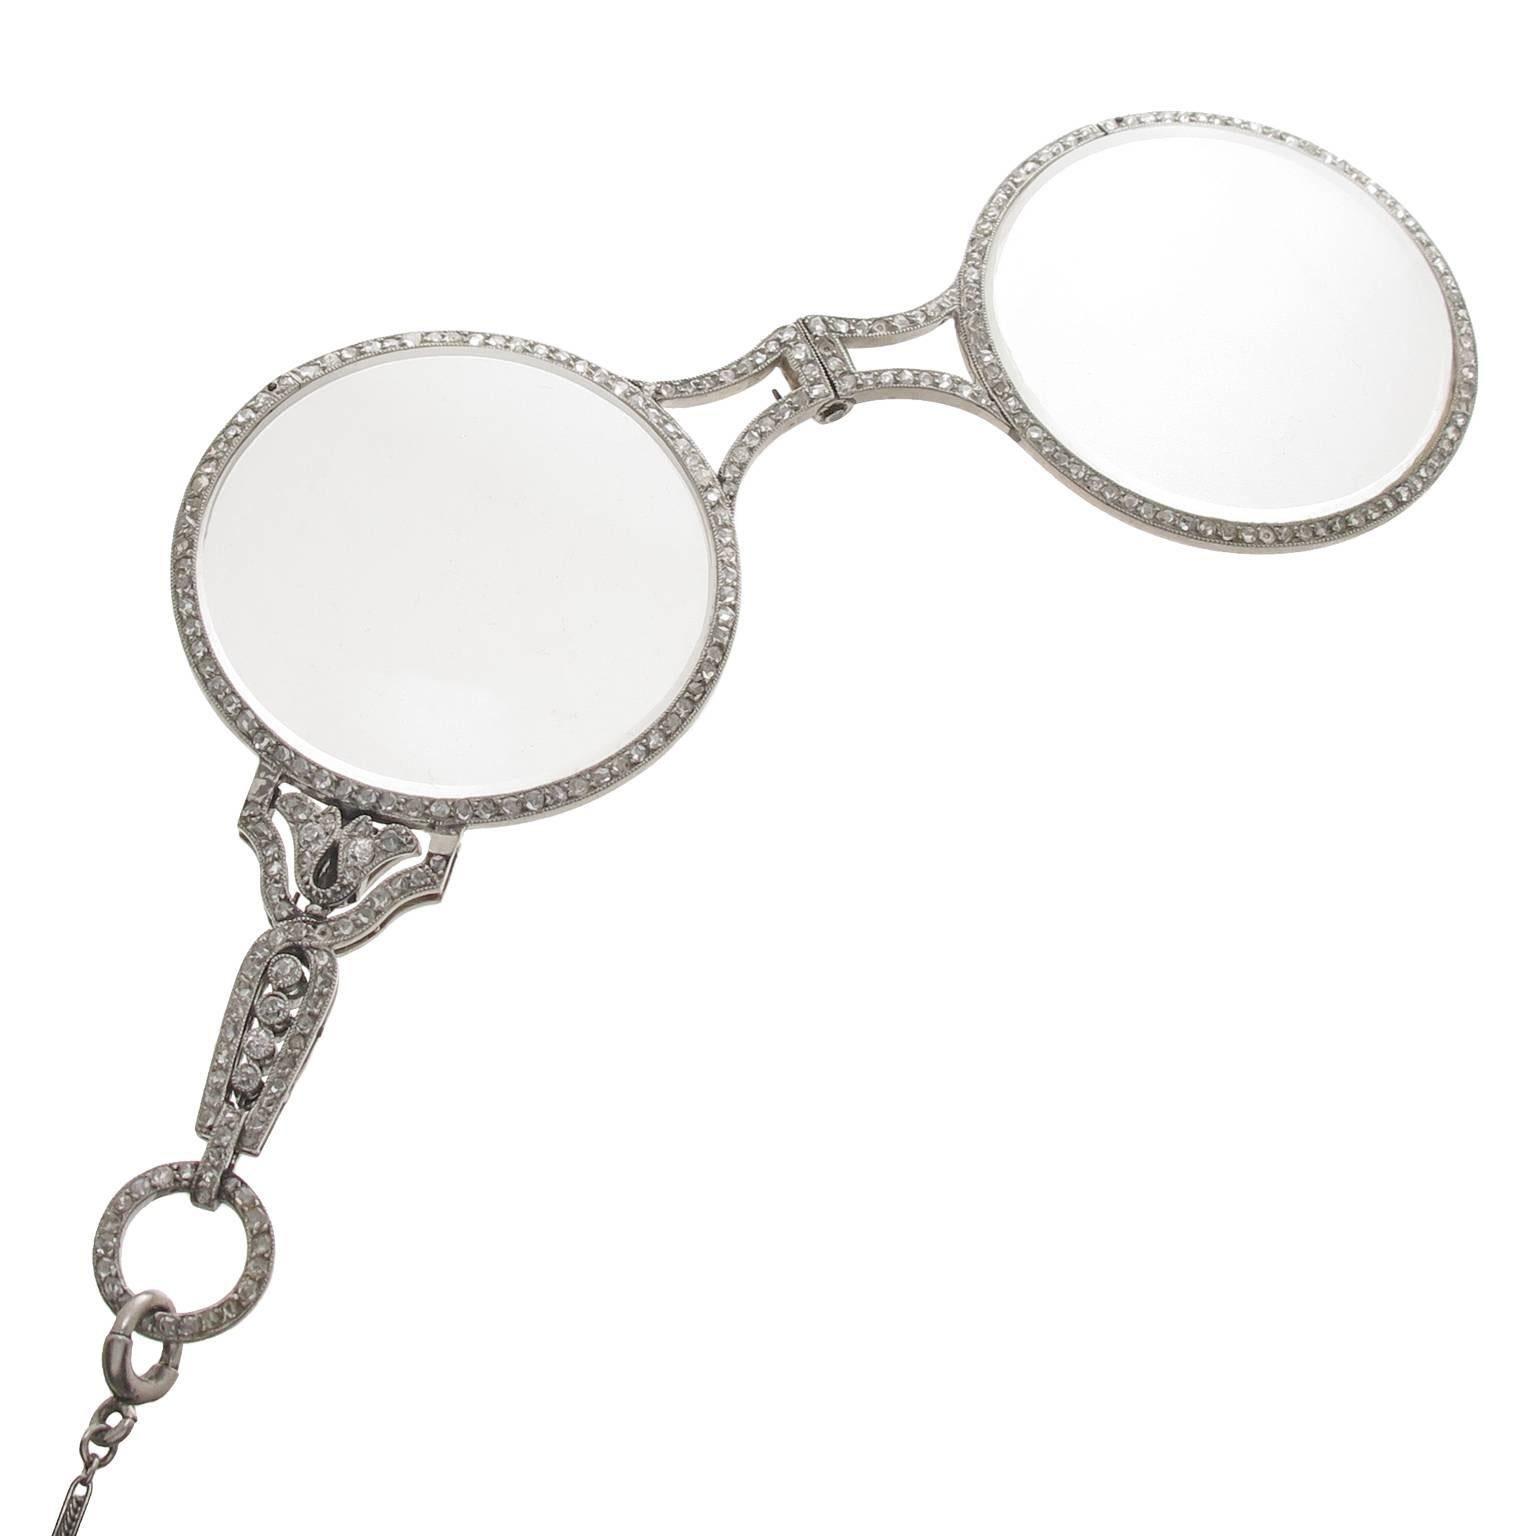 Circa 1910 Cartier Paris Platinum and Diamond set Lorgnette, measuring 3 1/4 inch in length and 1 1/2 inch in diameter. set on both sides with Rose cut Diamonds totaling approximately 3 Carats. Having the original Magnifying, reading lenses. The